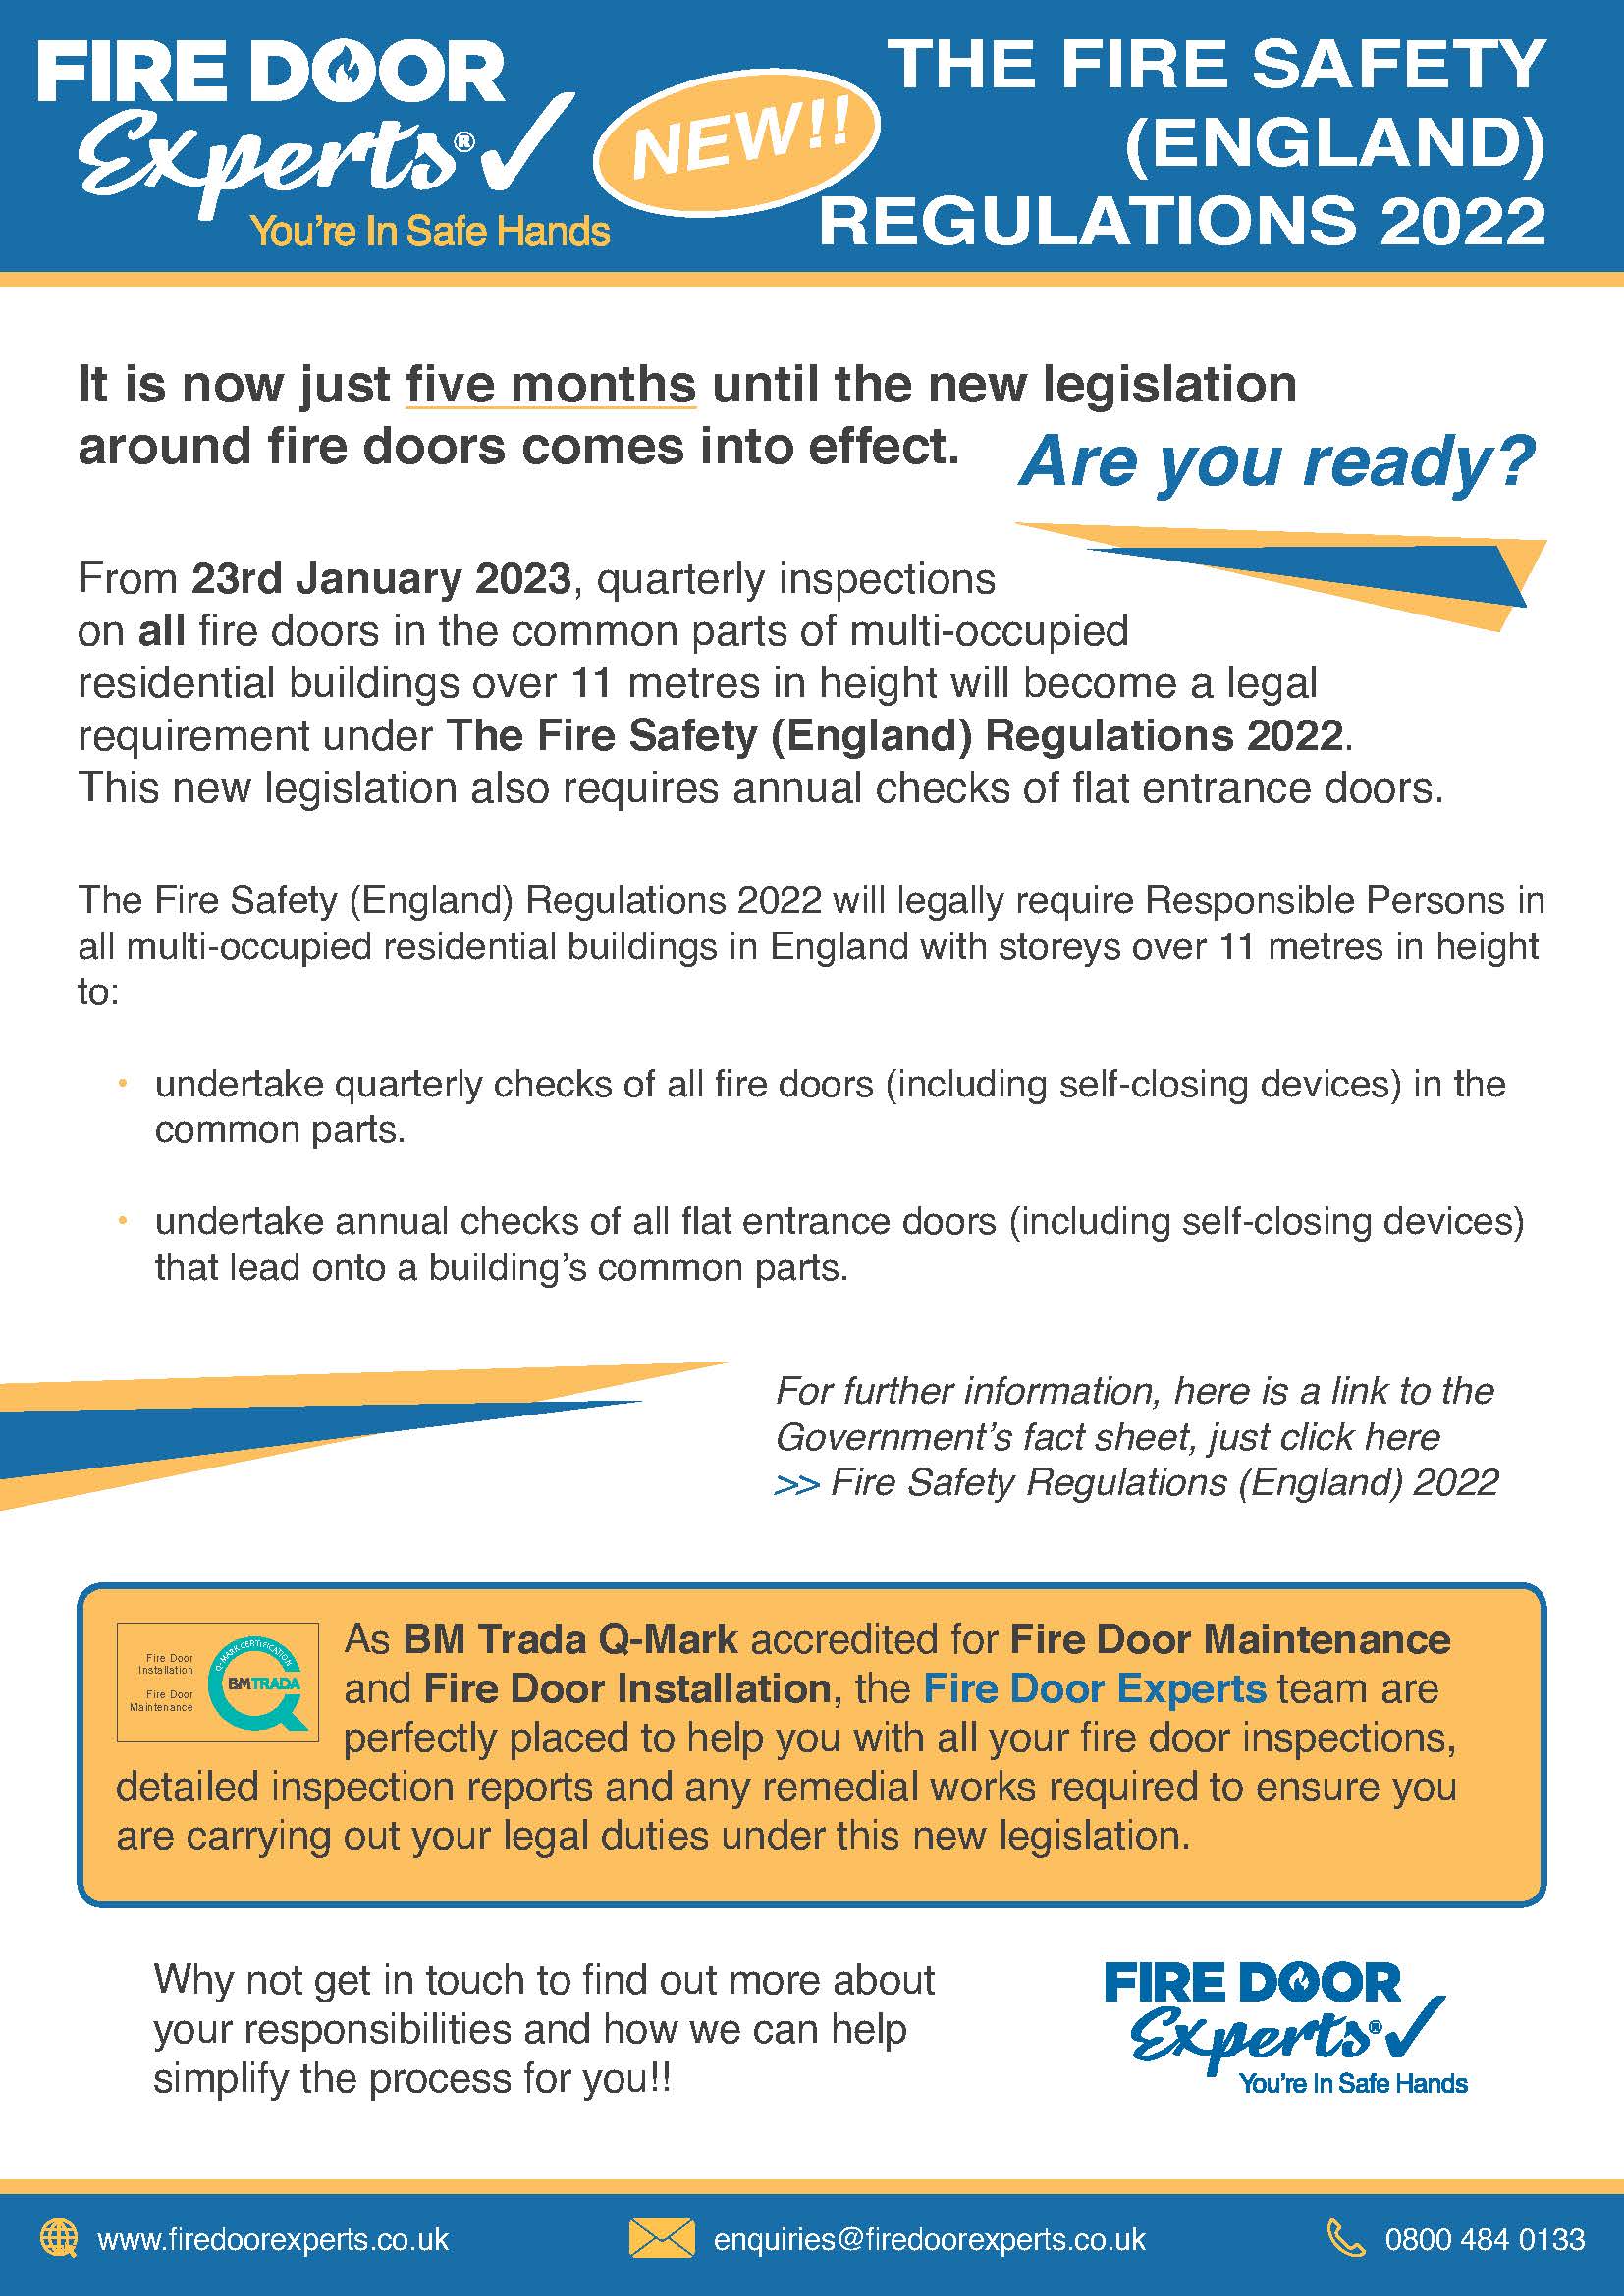 The Fire Safety (England) Regulations 2022 - Are you ready?